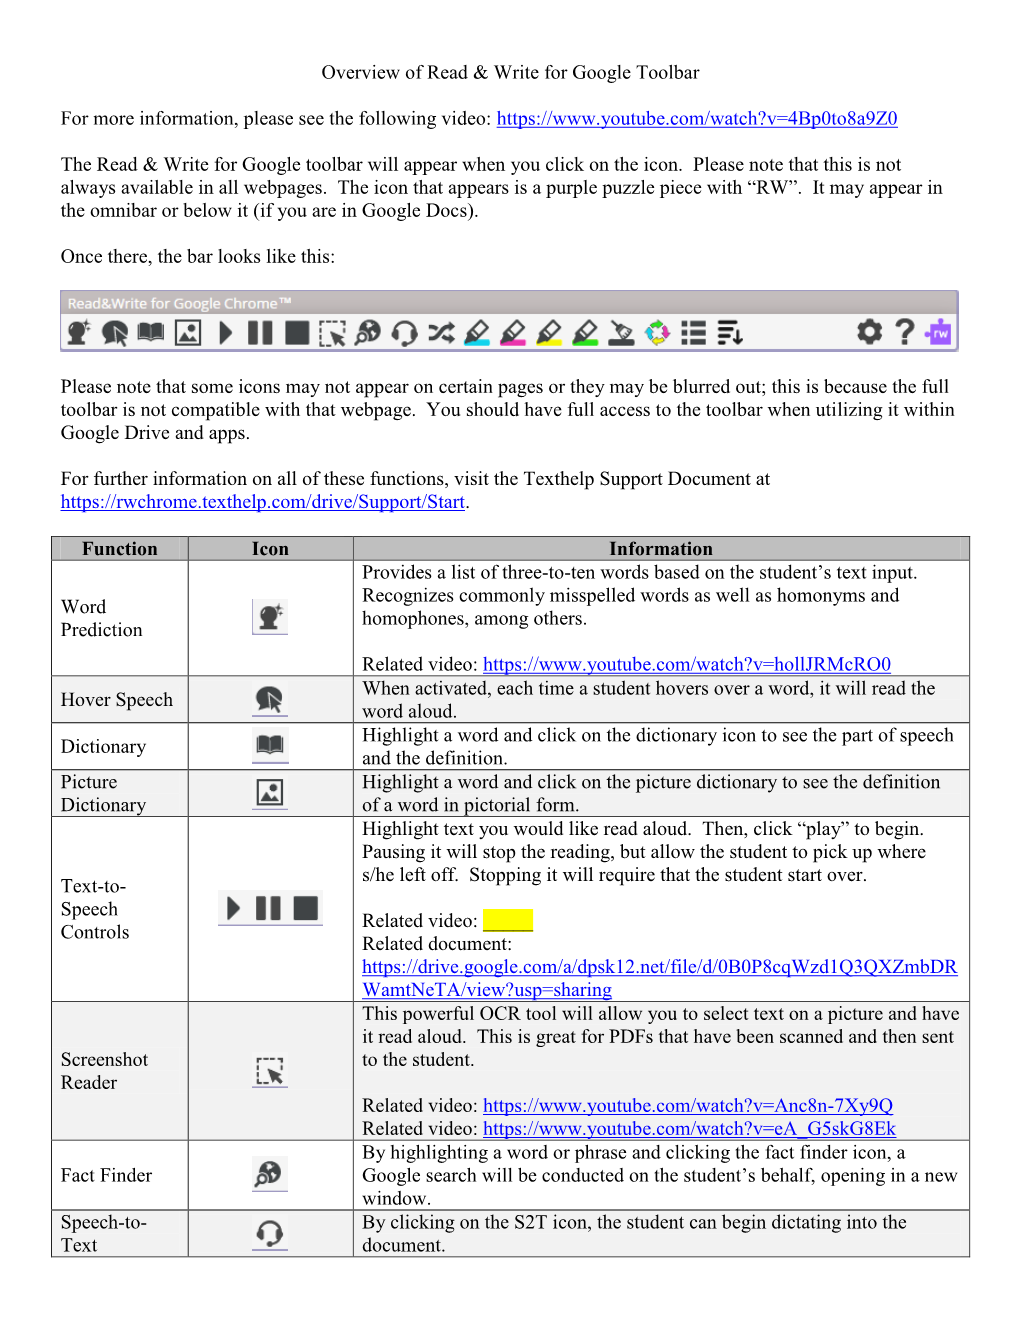 Overview of Read & Write for Google Toolbar for More Information